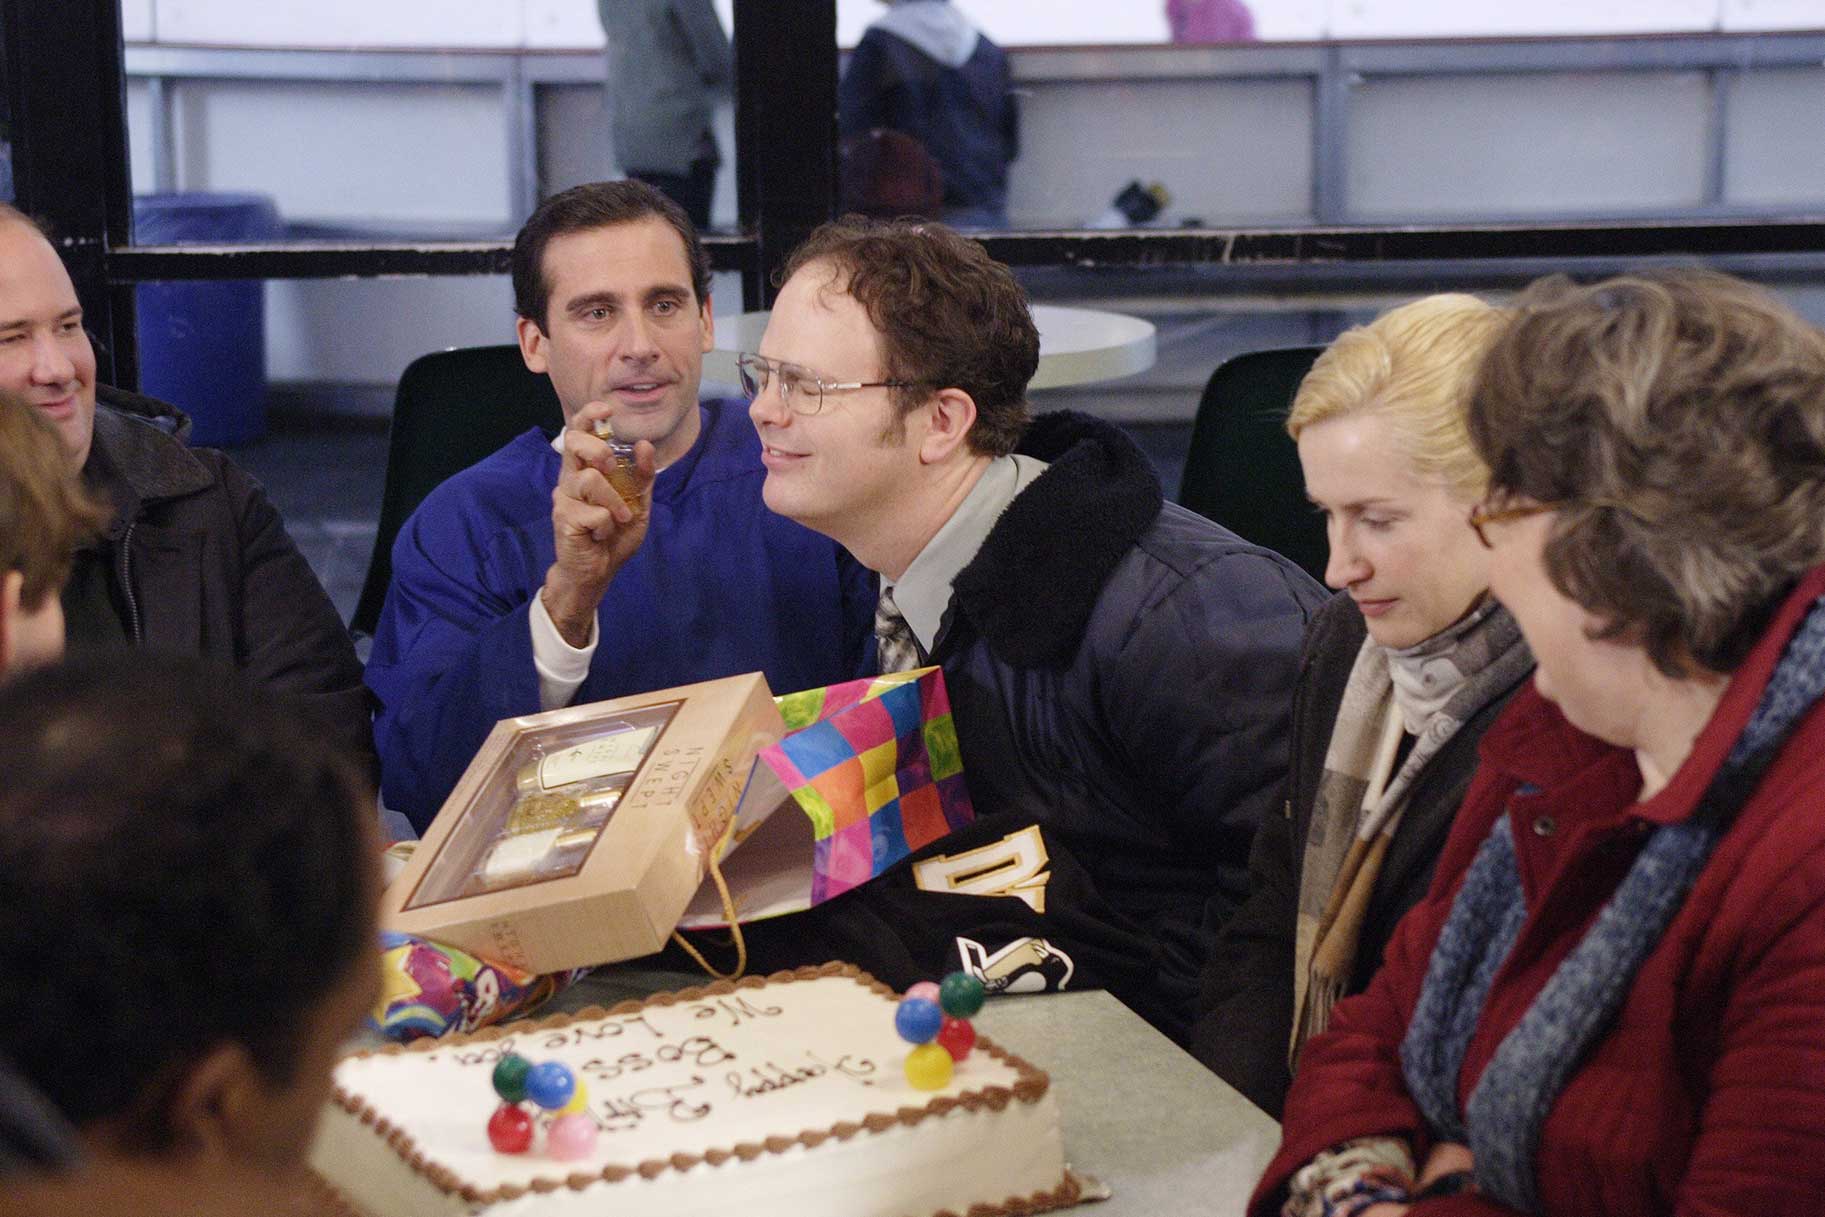 Donate to Charity & Win a Dinner Party With The Office Stars | NBC Insider